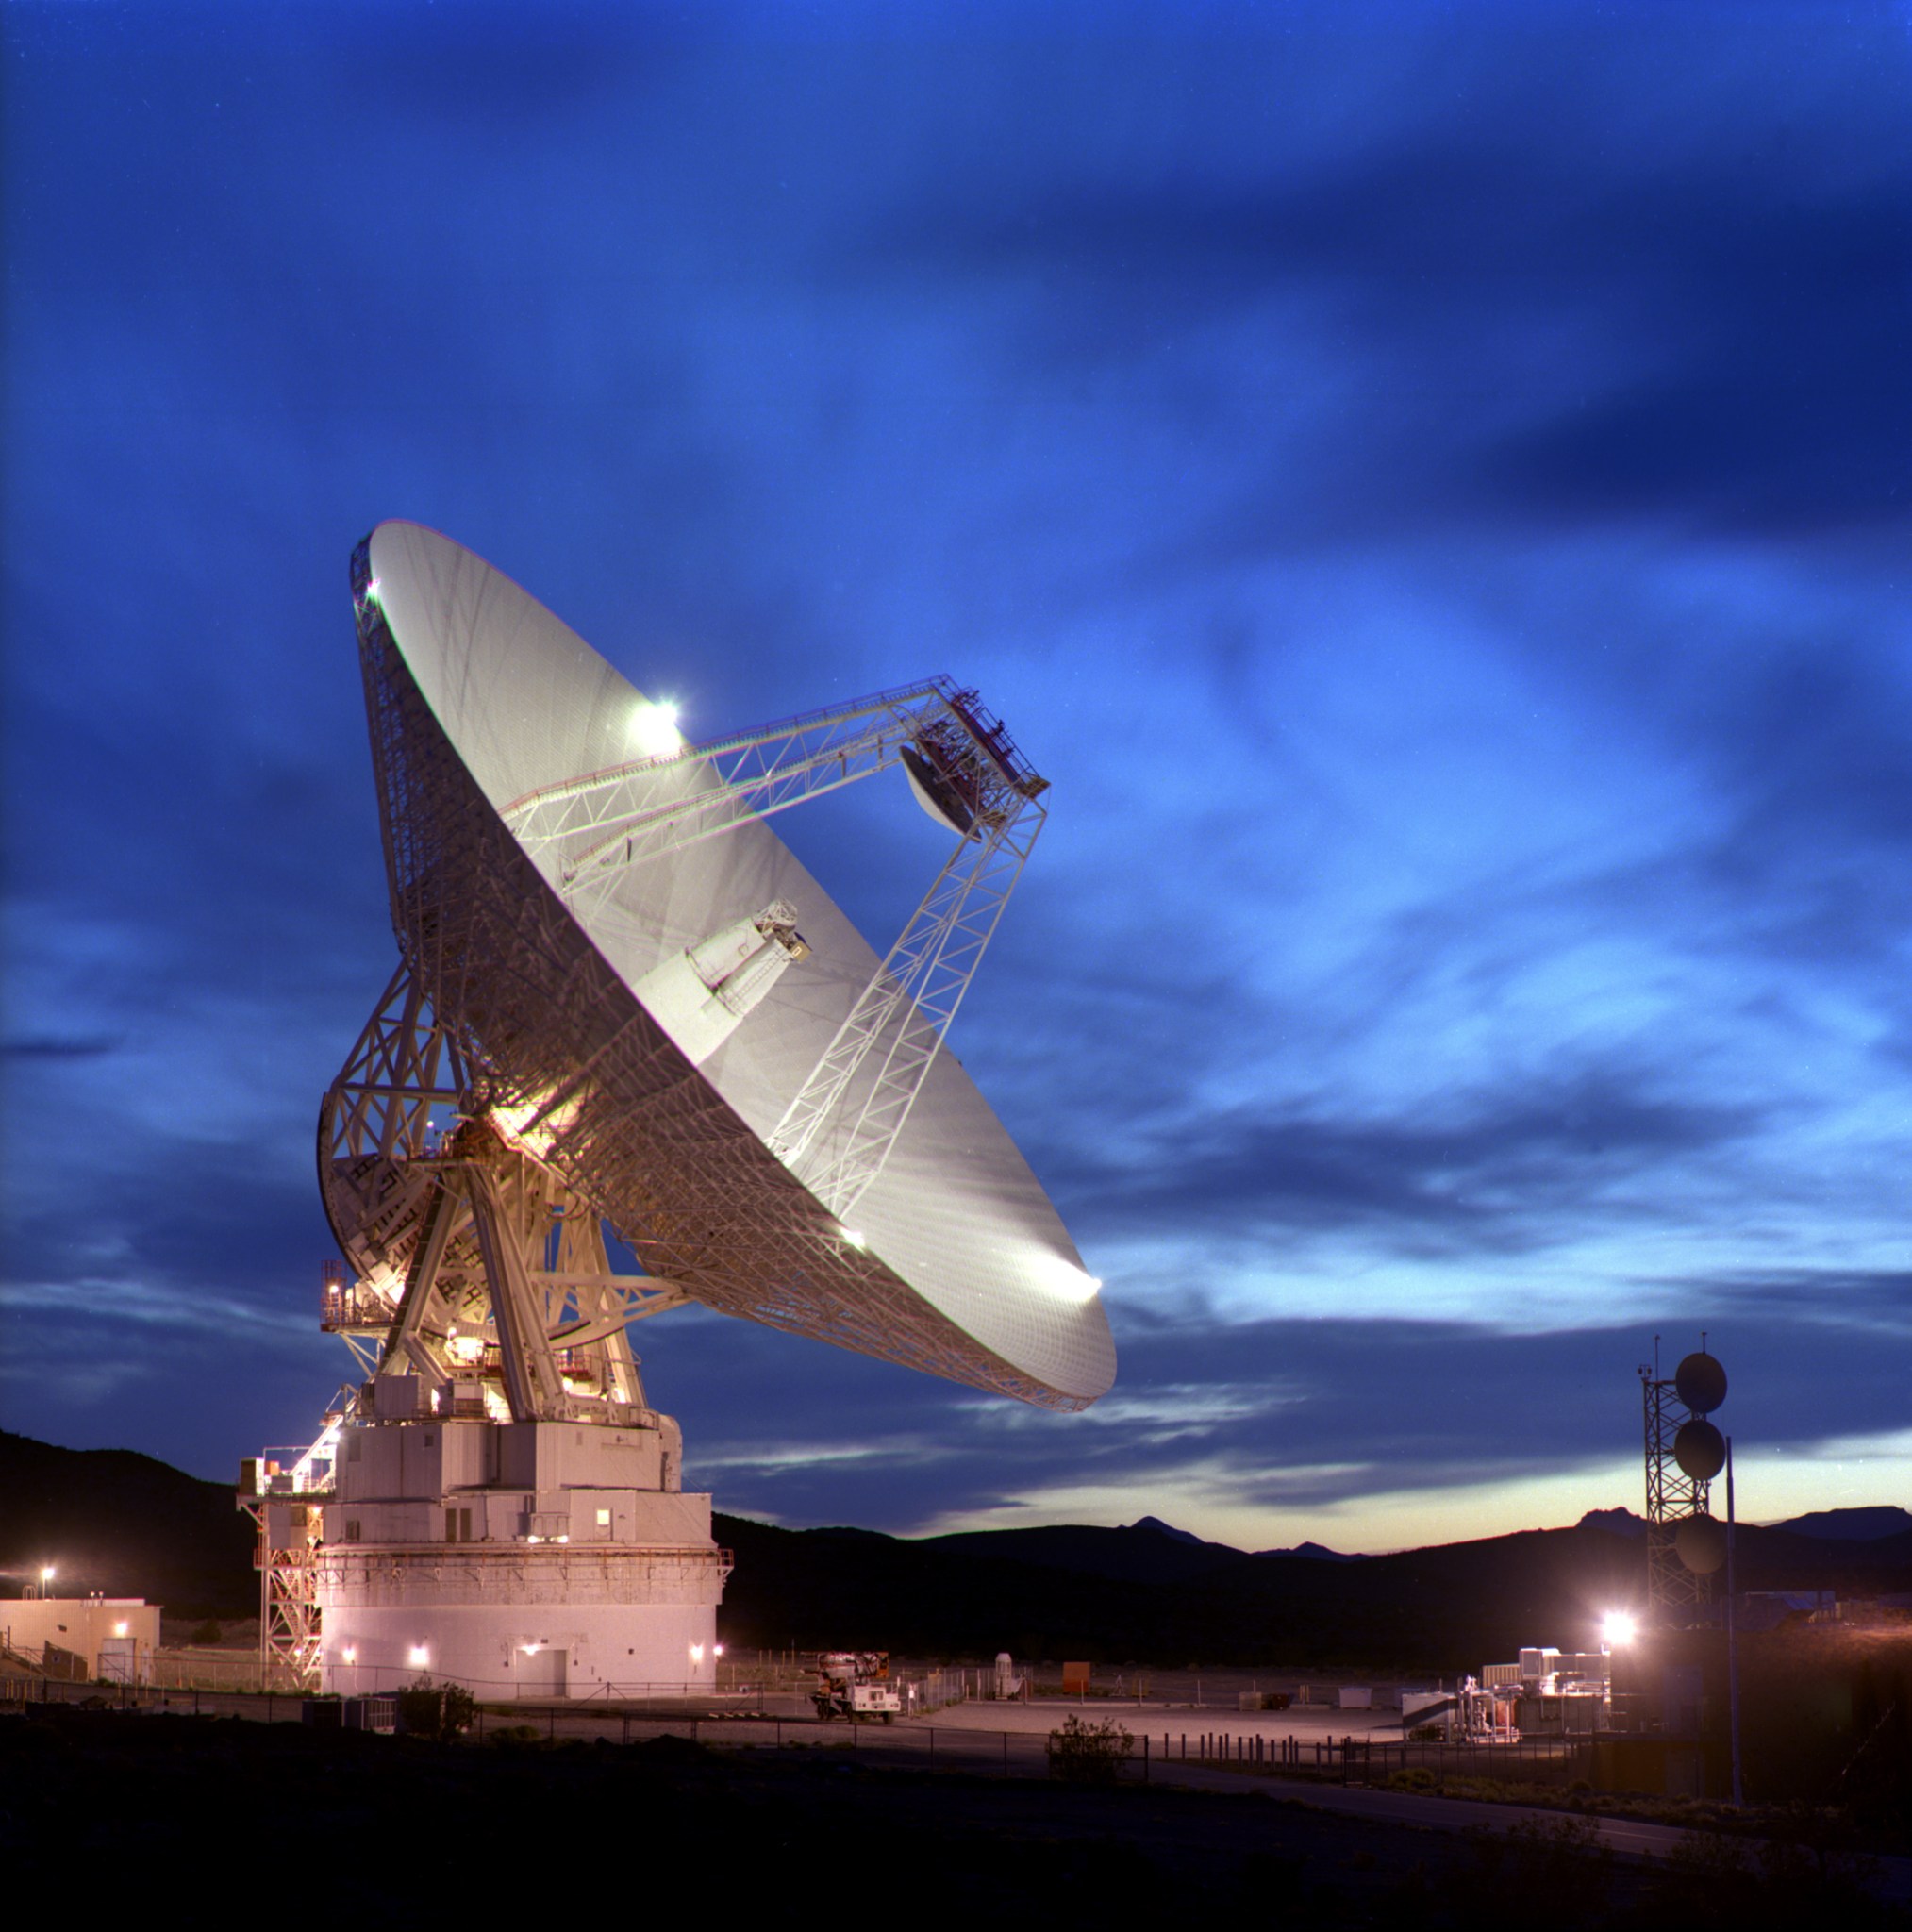 One of the large antennas for the Deep Space Network facility in Goldtone, California. The Deep Space Network has three facilities spread around the world to maintain communications with NASA spacecraft as they explore the solar system.